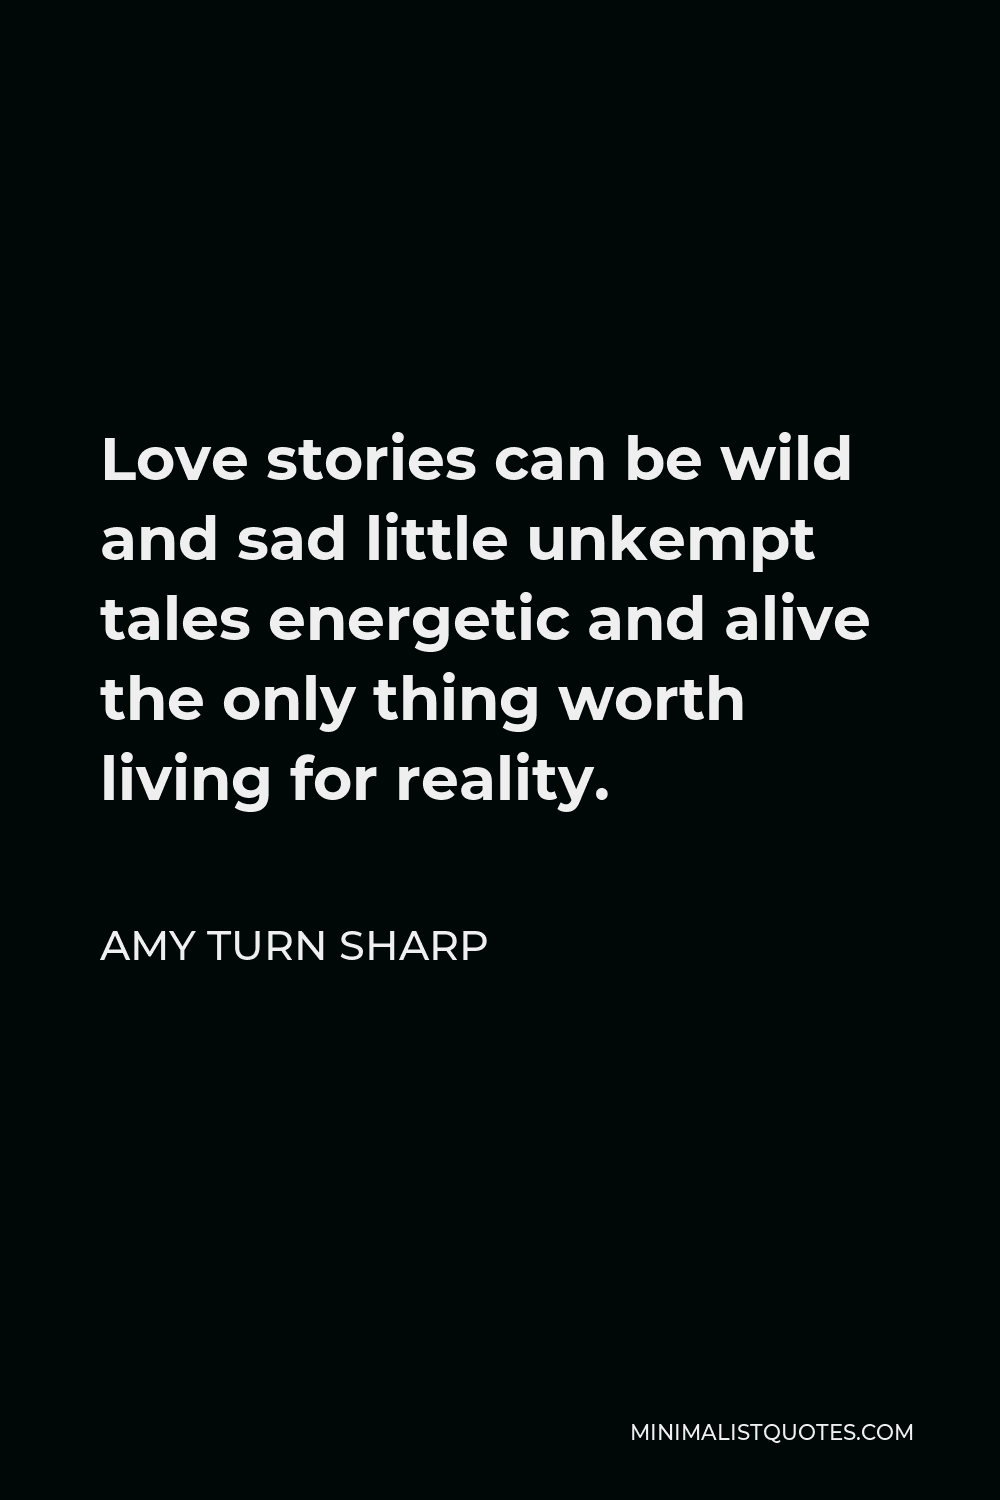 Amy Turn Sharp Quote - Love stories can be wild and sad little unkempt tales energetic and alive the only thing worth living for reality.